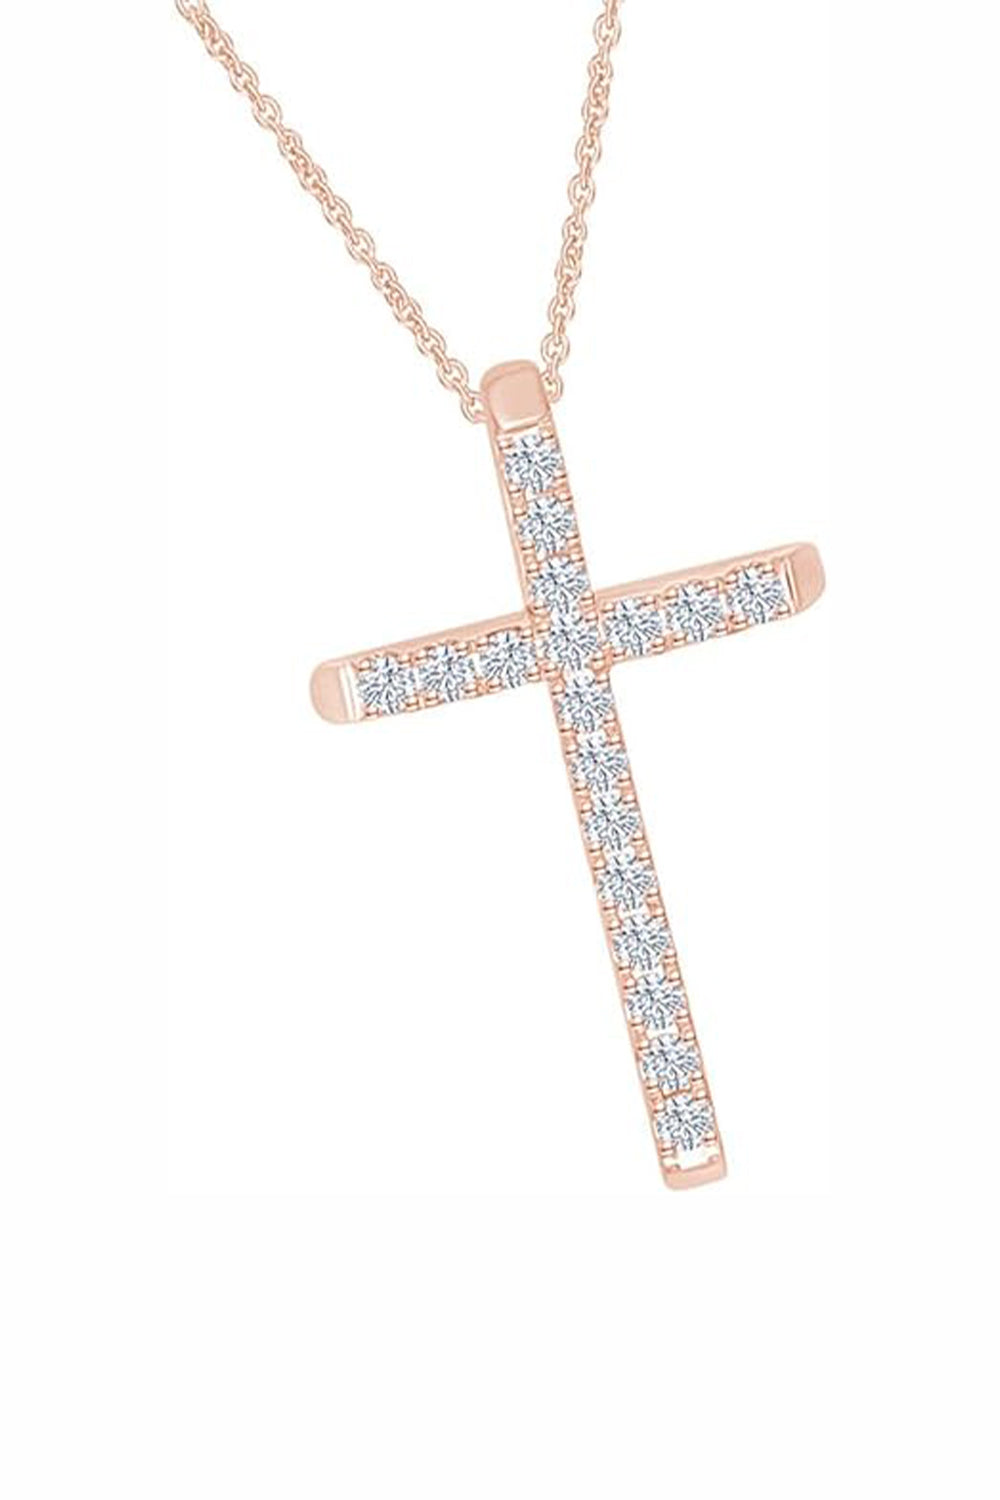 Rose Gold Color Stylish Cross Pendant Necklace in 18K Gold 